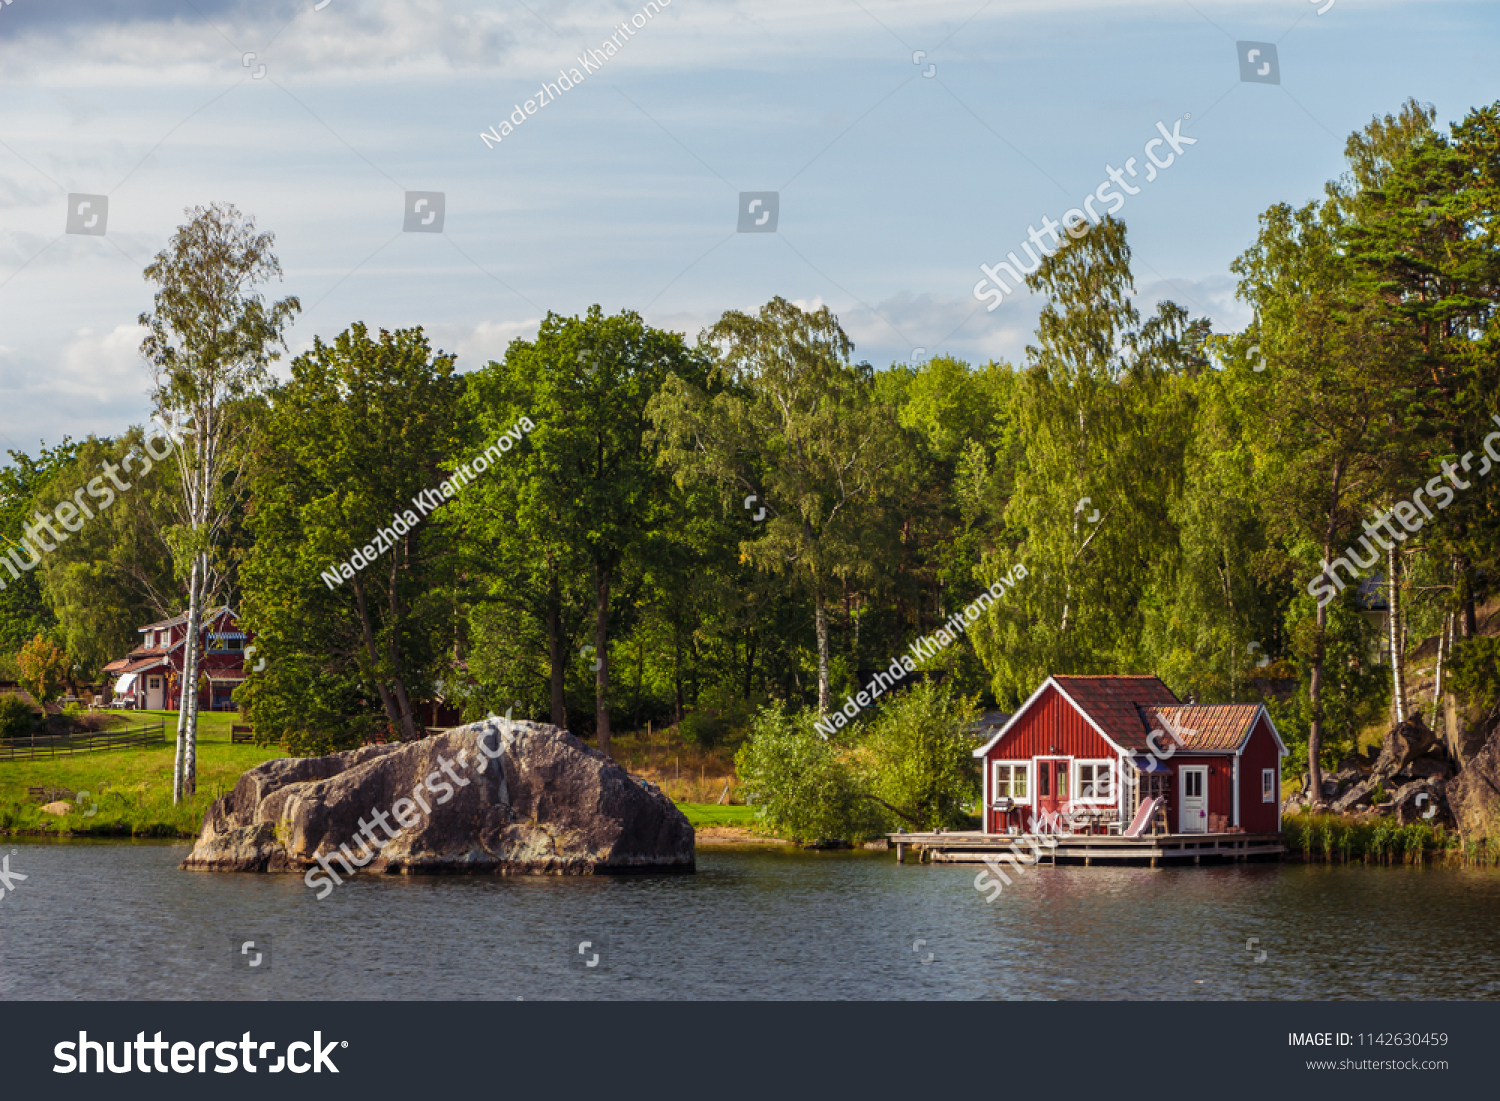 View on red holiday cabin by a lake in Stockholm archipelago, Sweden. Wooden cottage, sauna on shore. Tiny house near the water. Rocky small island, islet in water. Buildings surrounded by green trees #1142630459